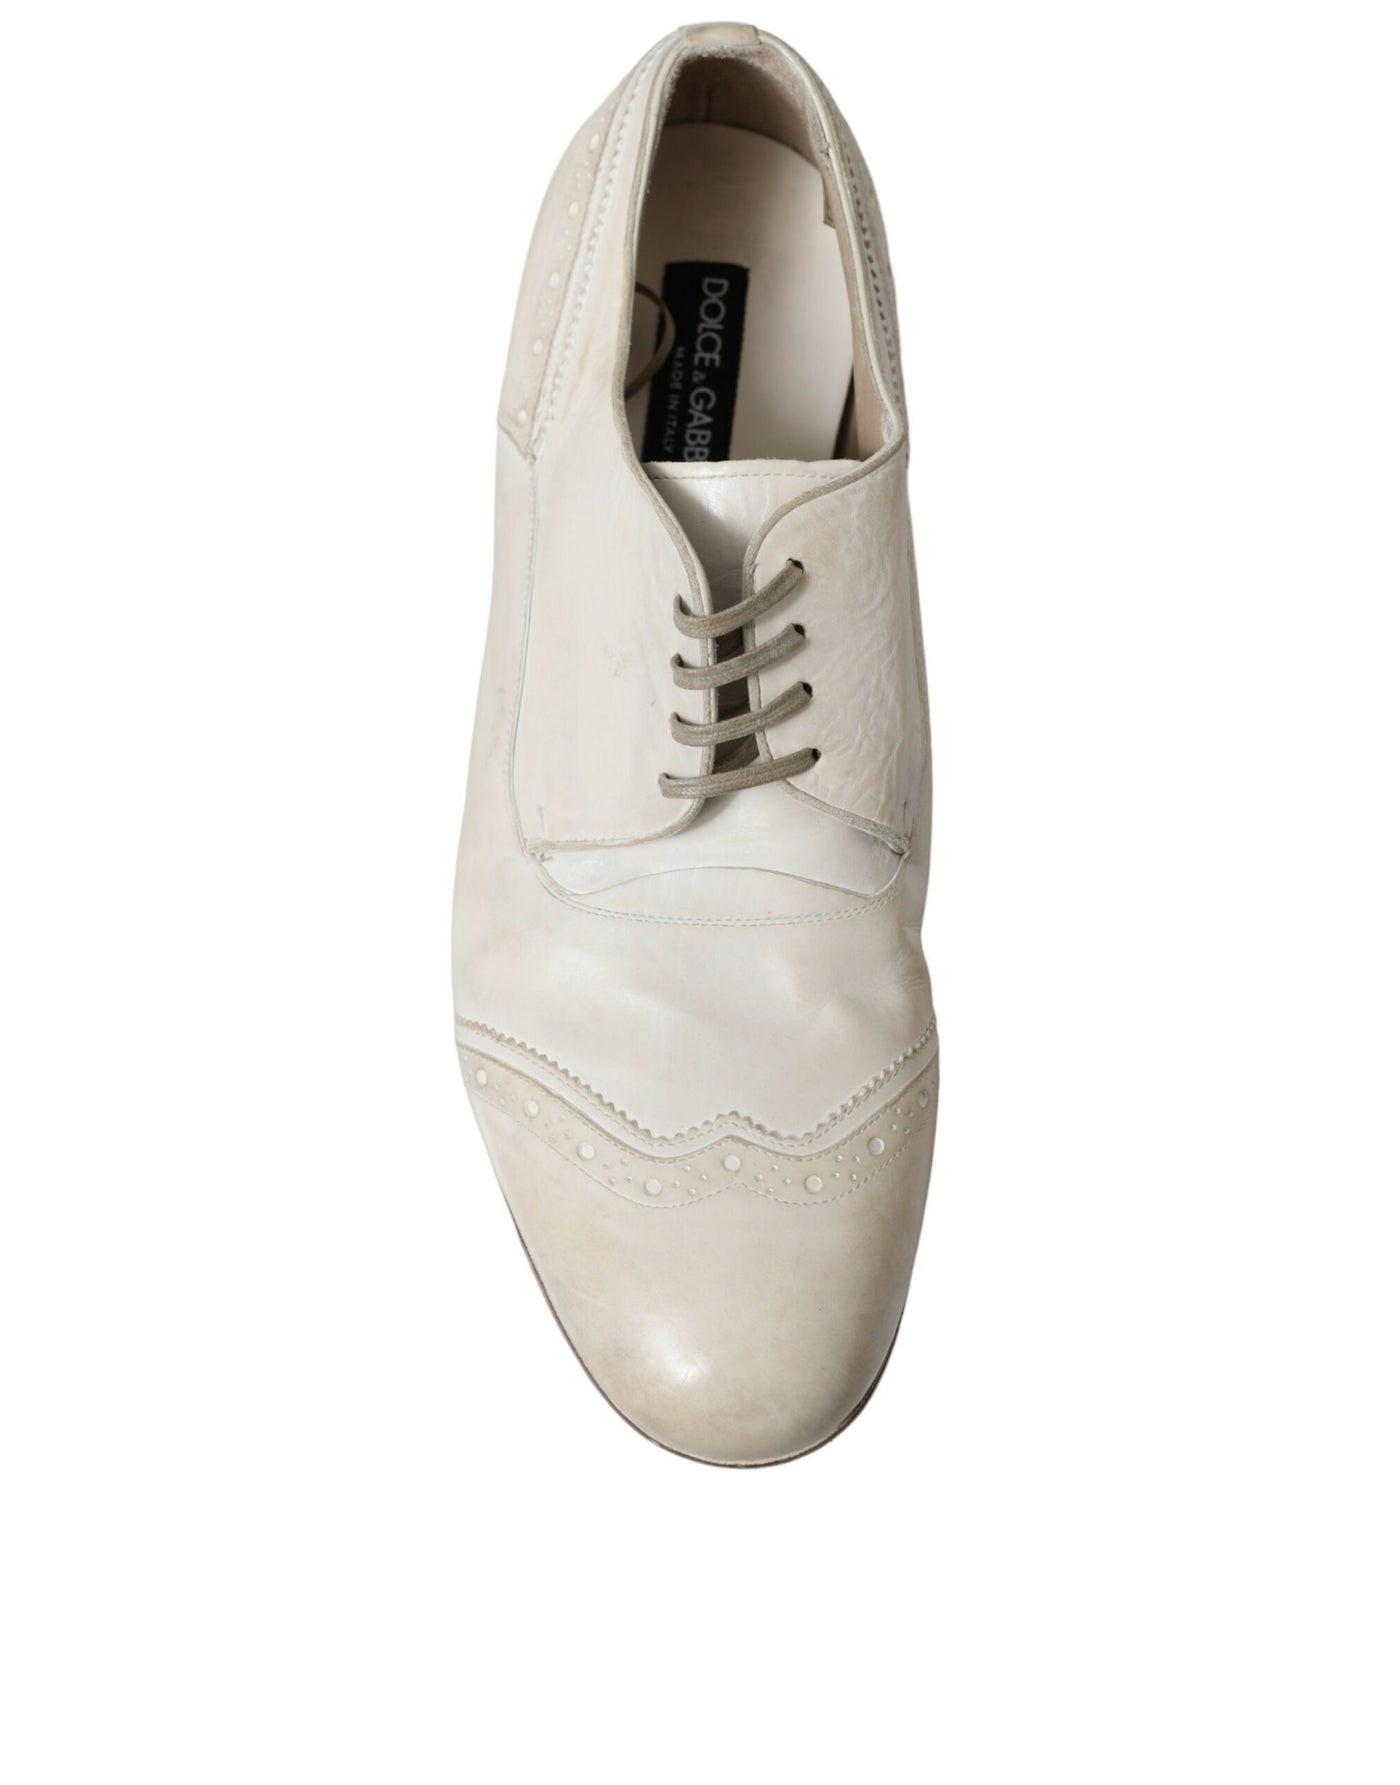 Dolce & Gabbana White Distressed Leather Brogue Dress Shoes